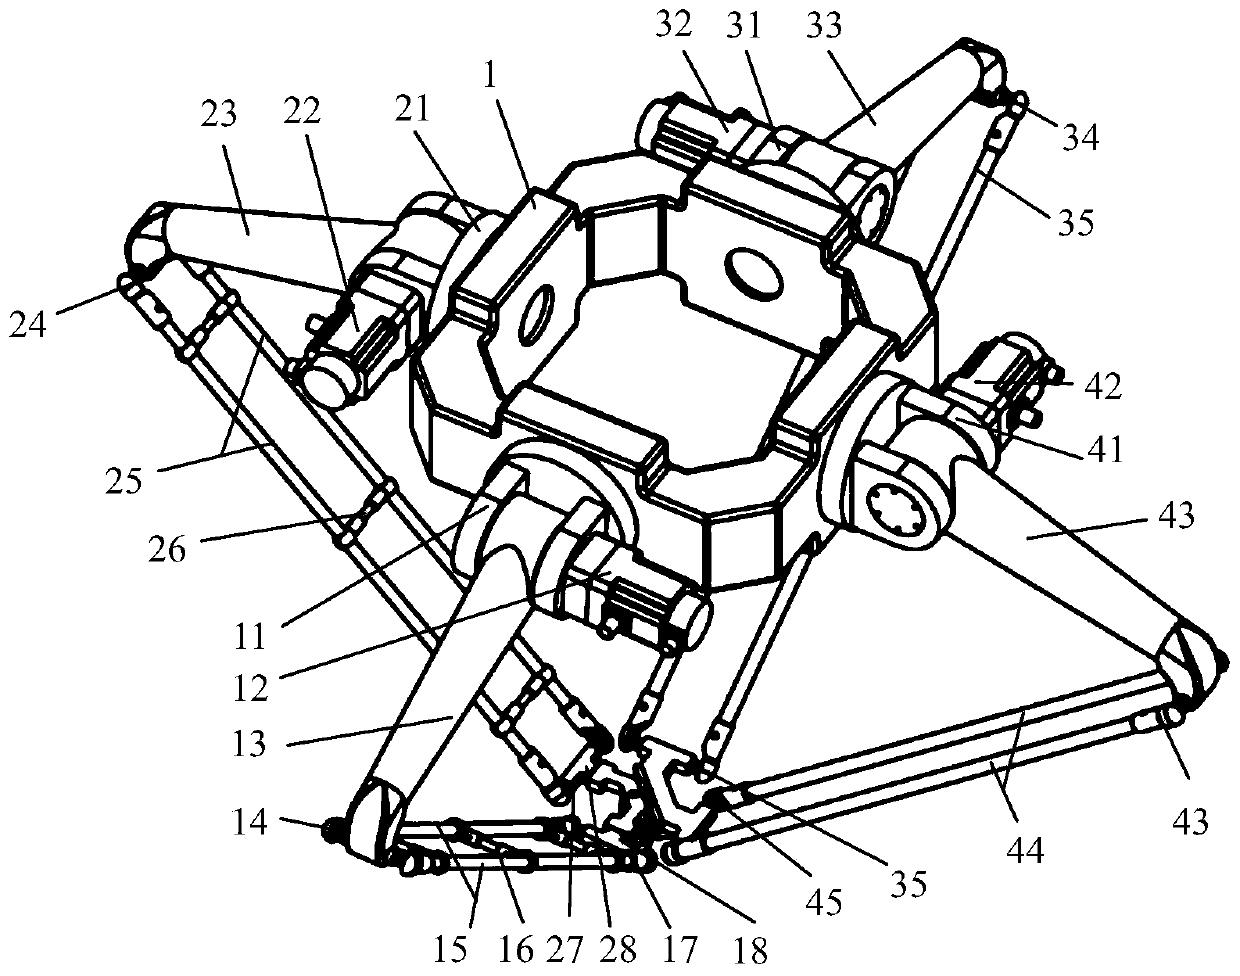 Four-degree-of-freedom parallel robot mechanism